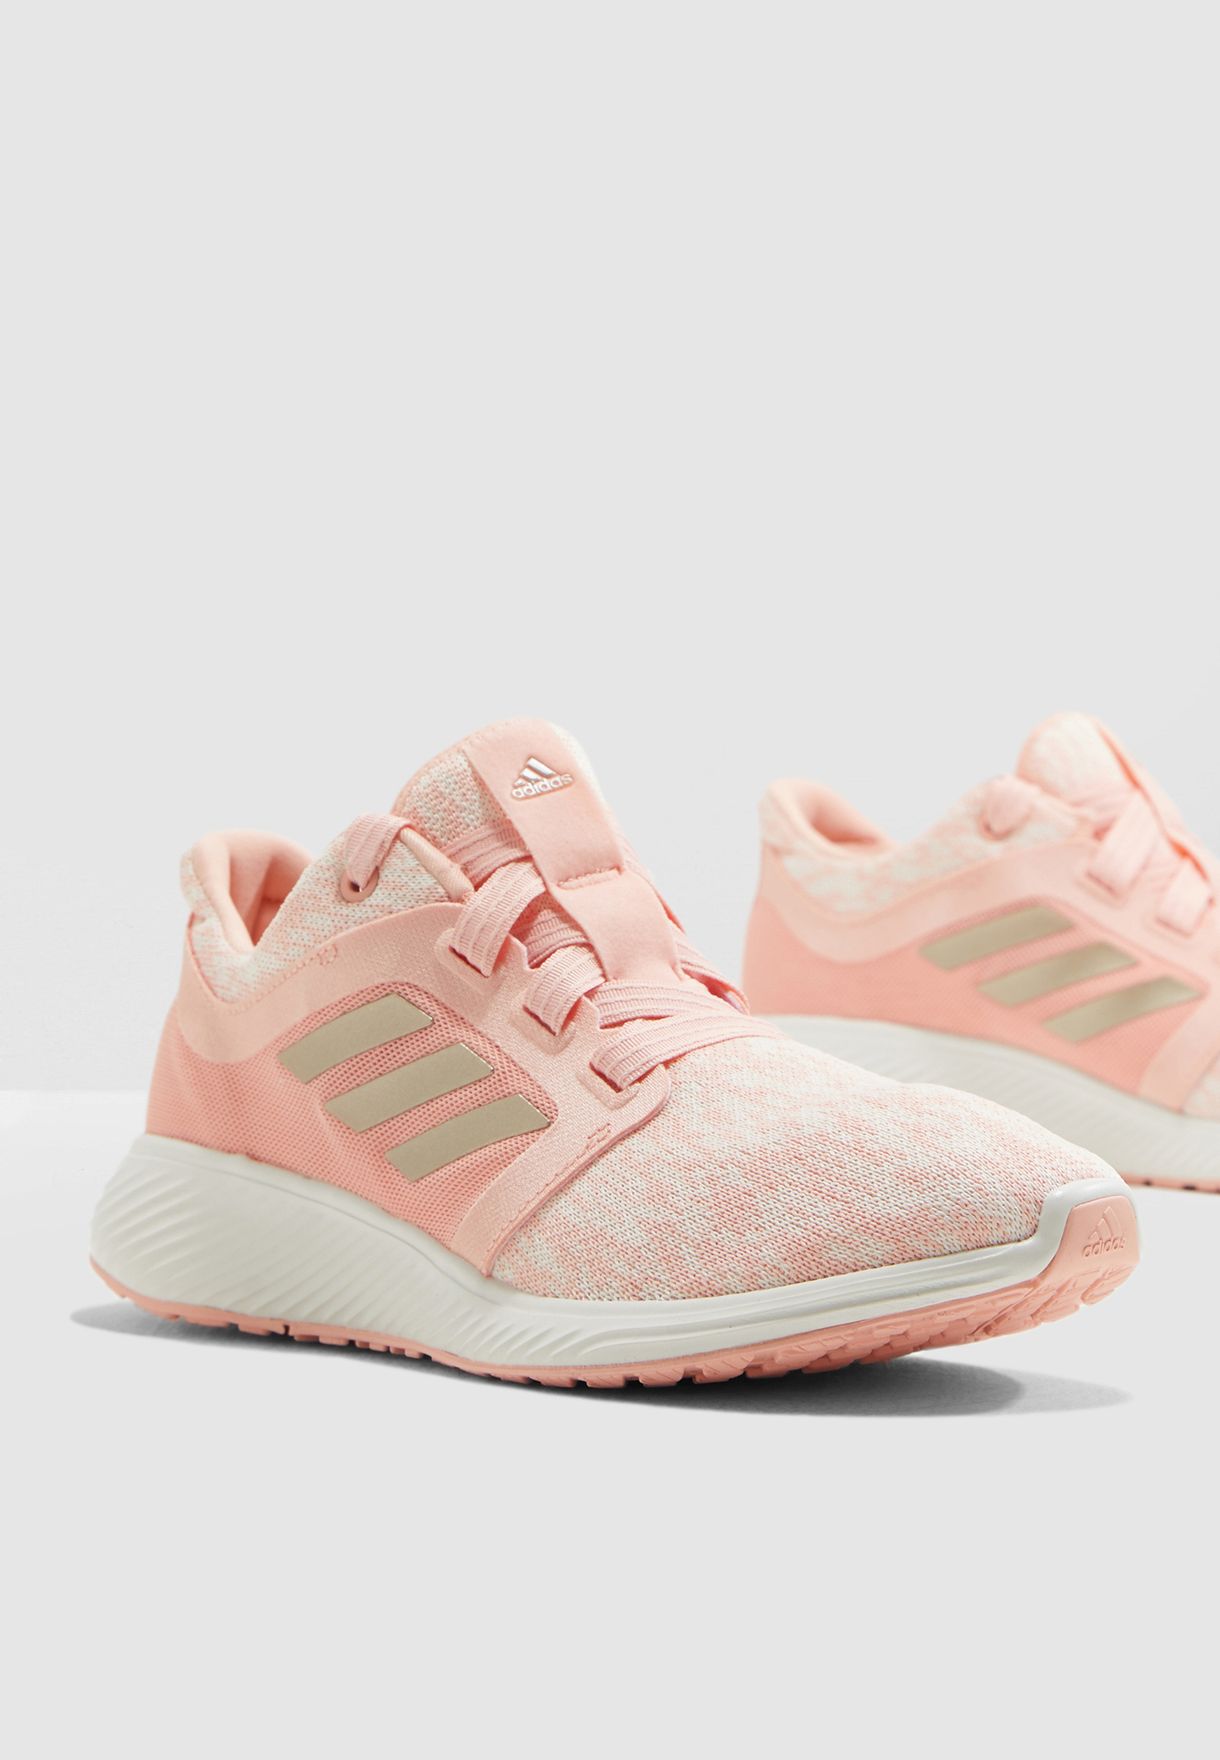 adidas edge lux bounce pink